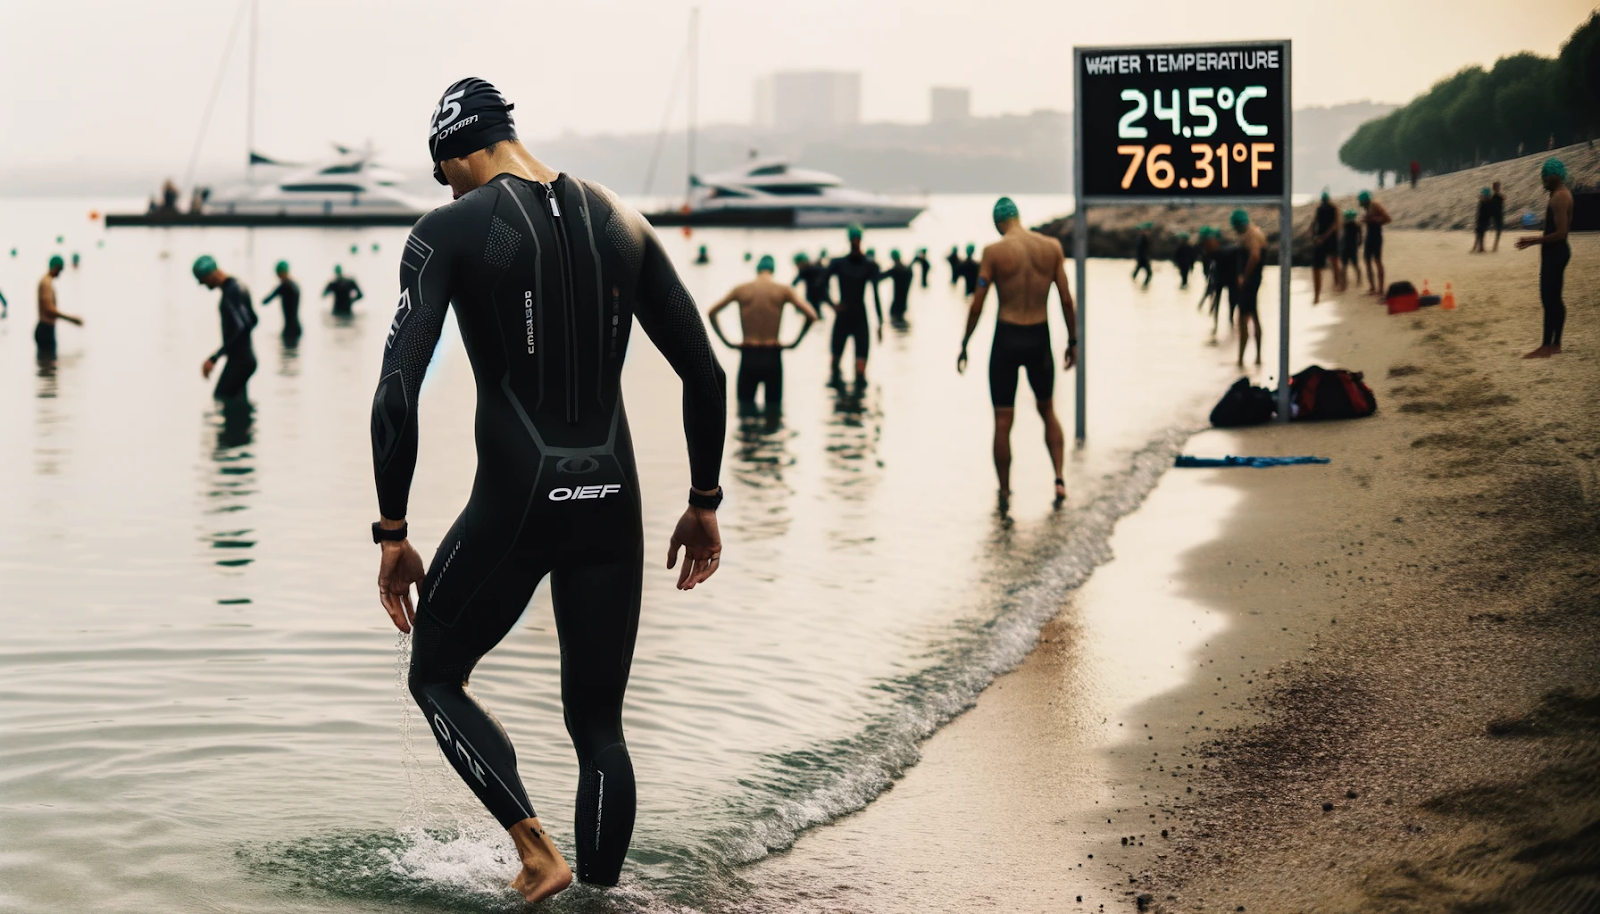 Photo of a professional triathlete at the shoreline, wearing a full wetsuit, preparing to enter the water. The environment appears calm, with a few other competitors in the distance getting ready. A clear sign nearby states the water temperature as '24.5°C (76.1°F)'.